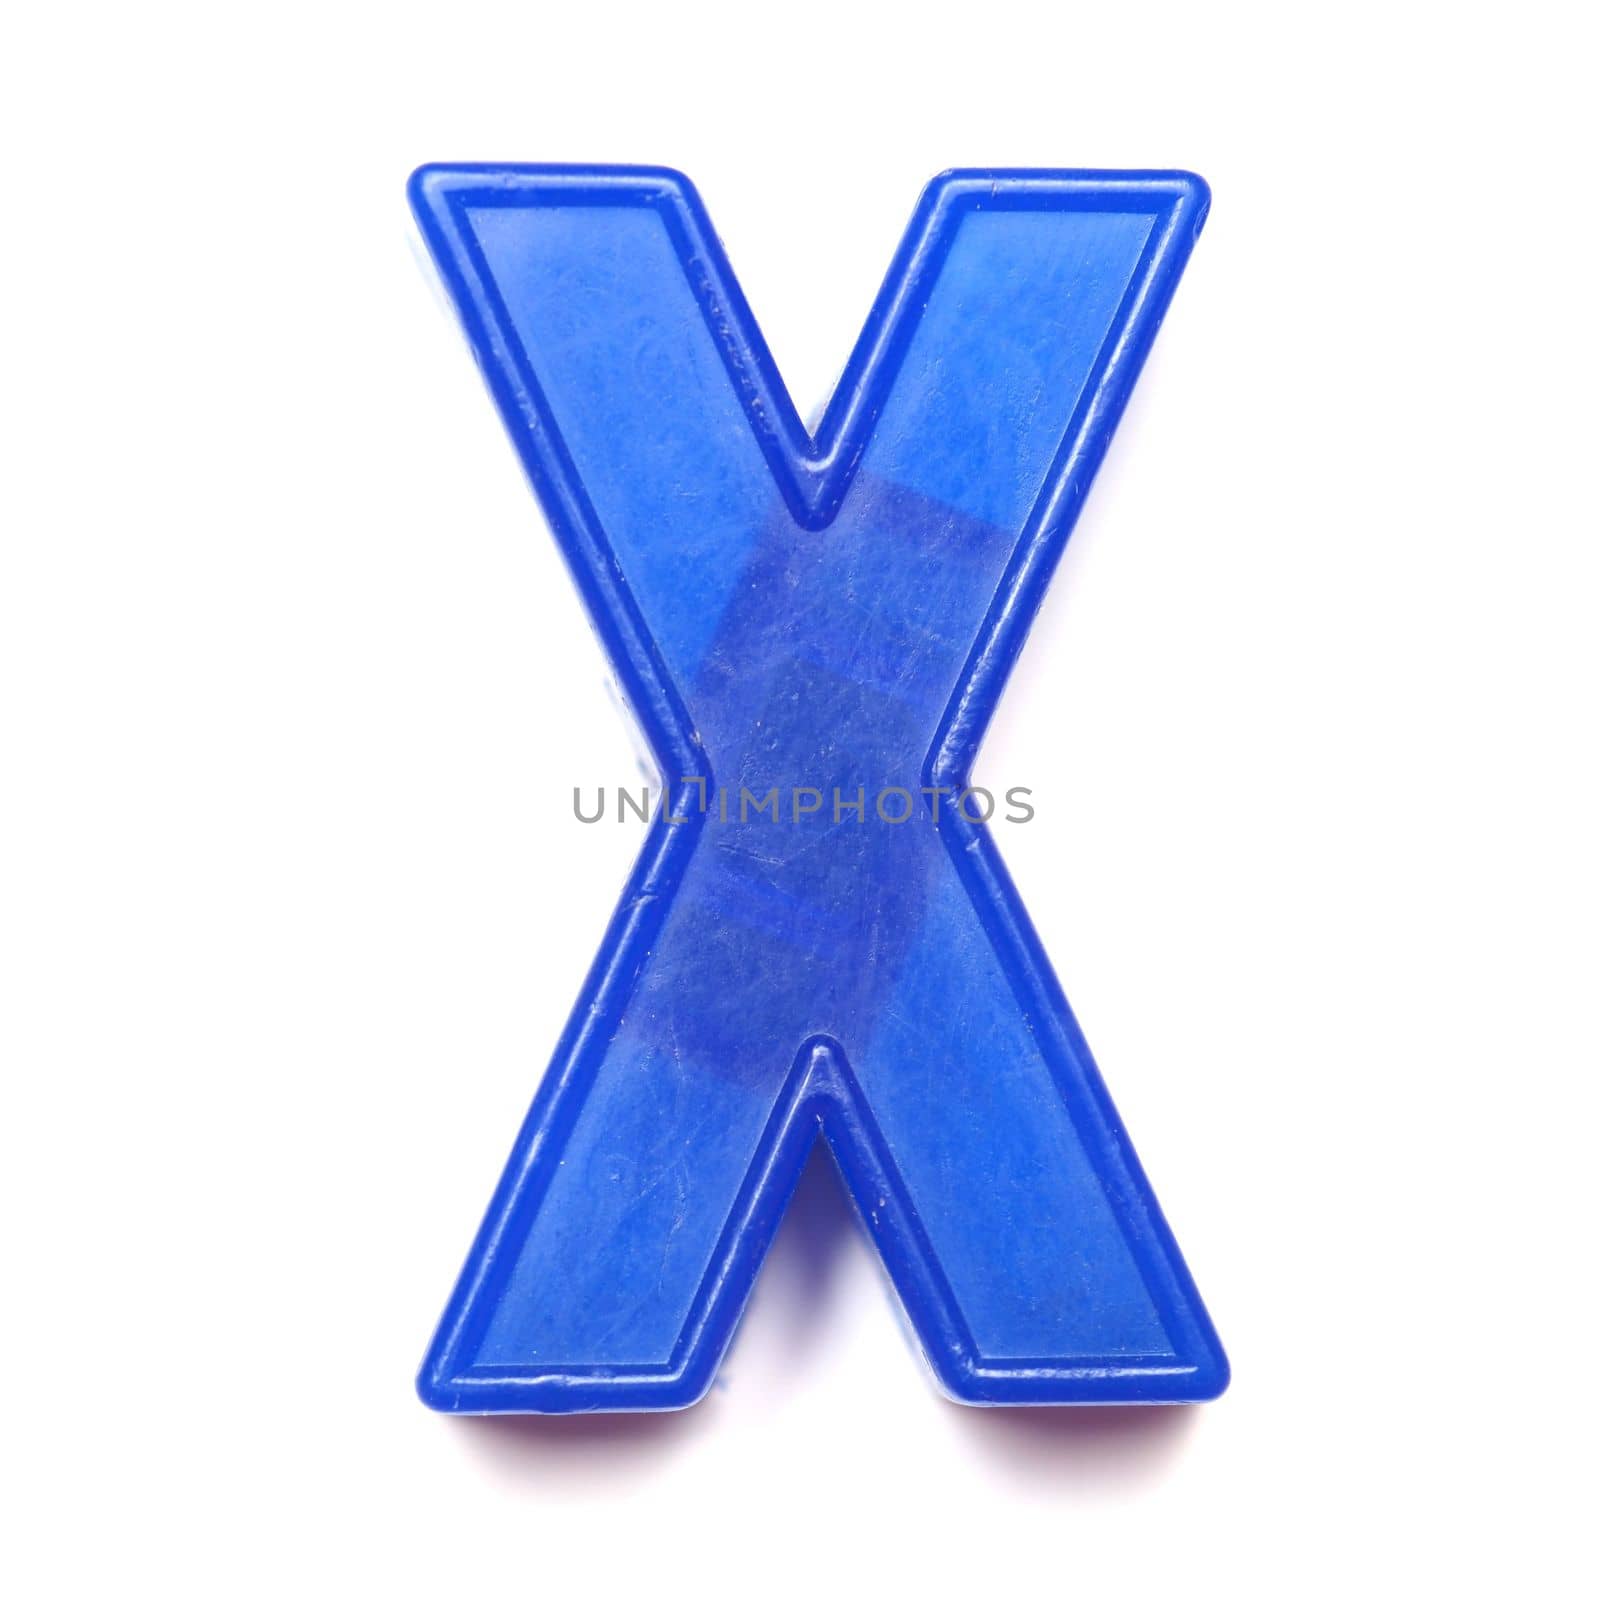 Magnetic uppercase letter X of the British alphabet